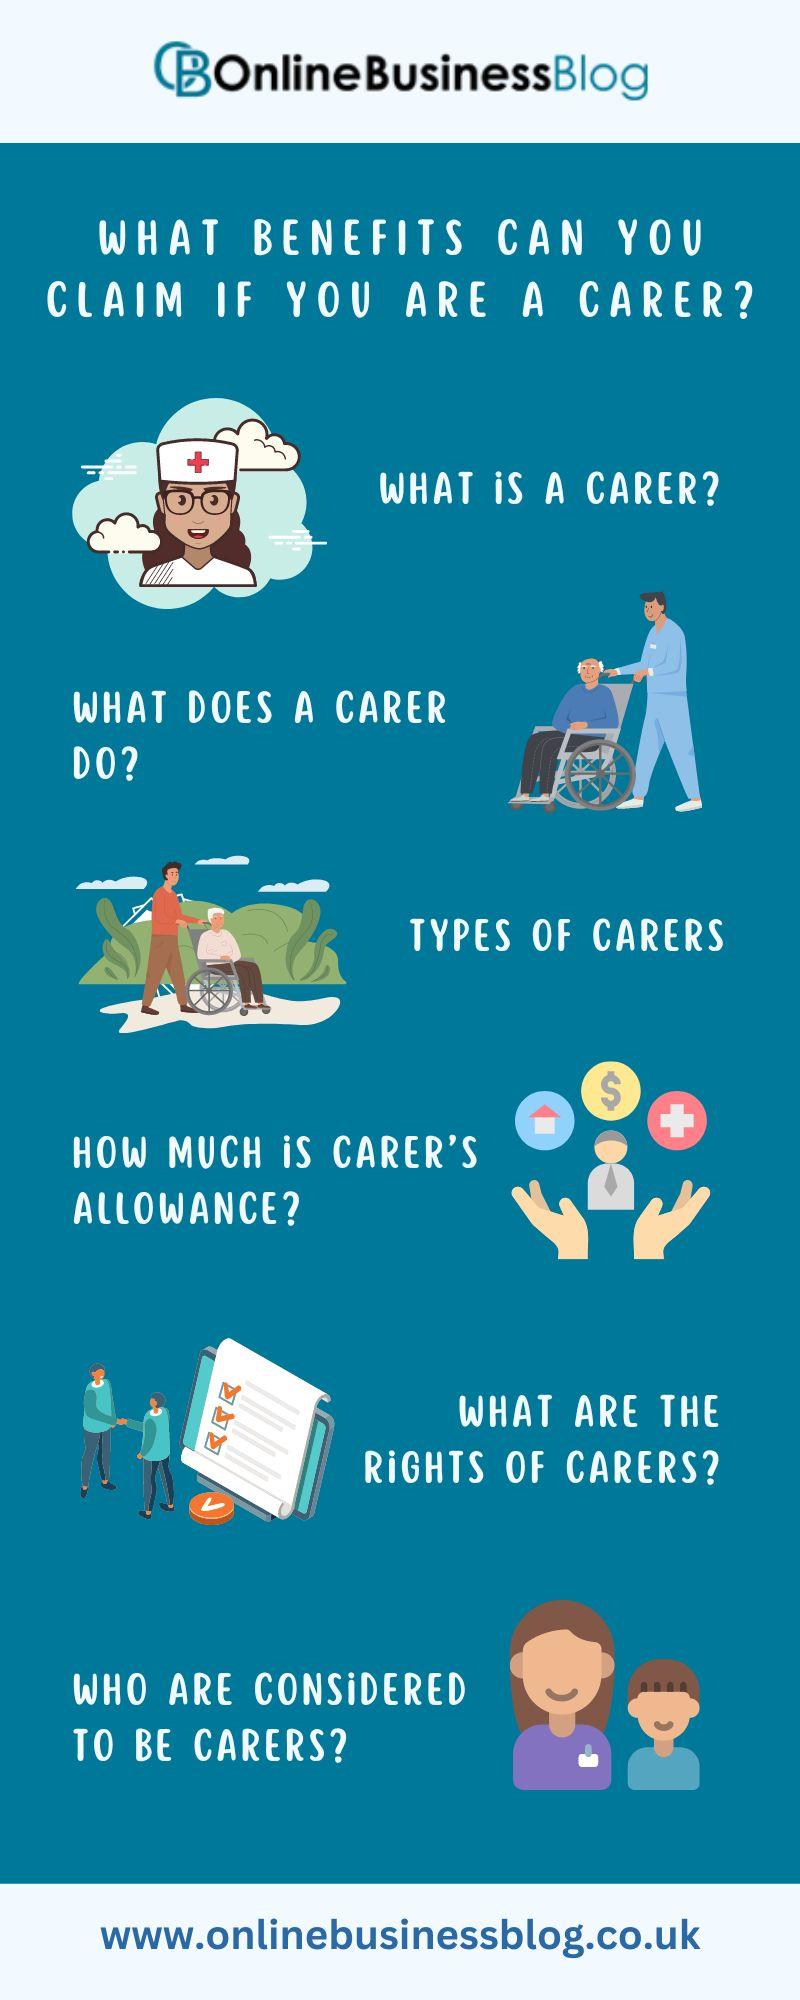 What Benefits Can You Claim if You Are a Carer